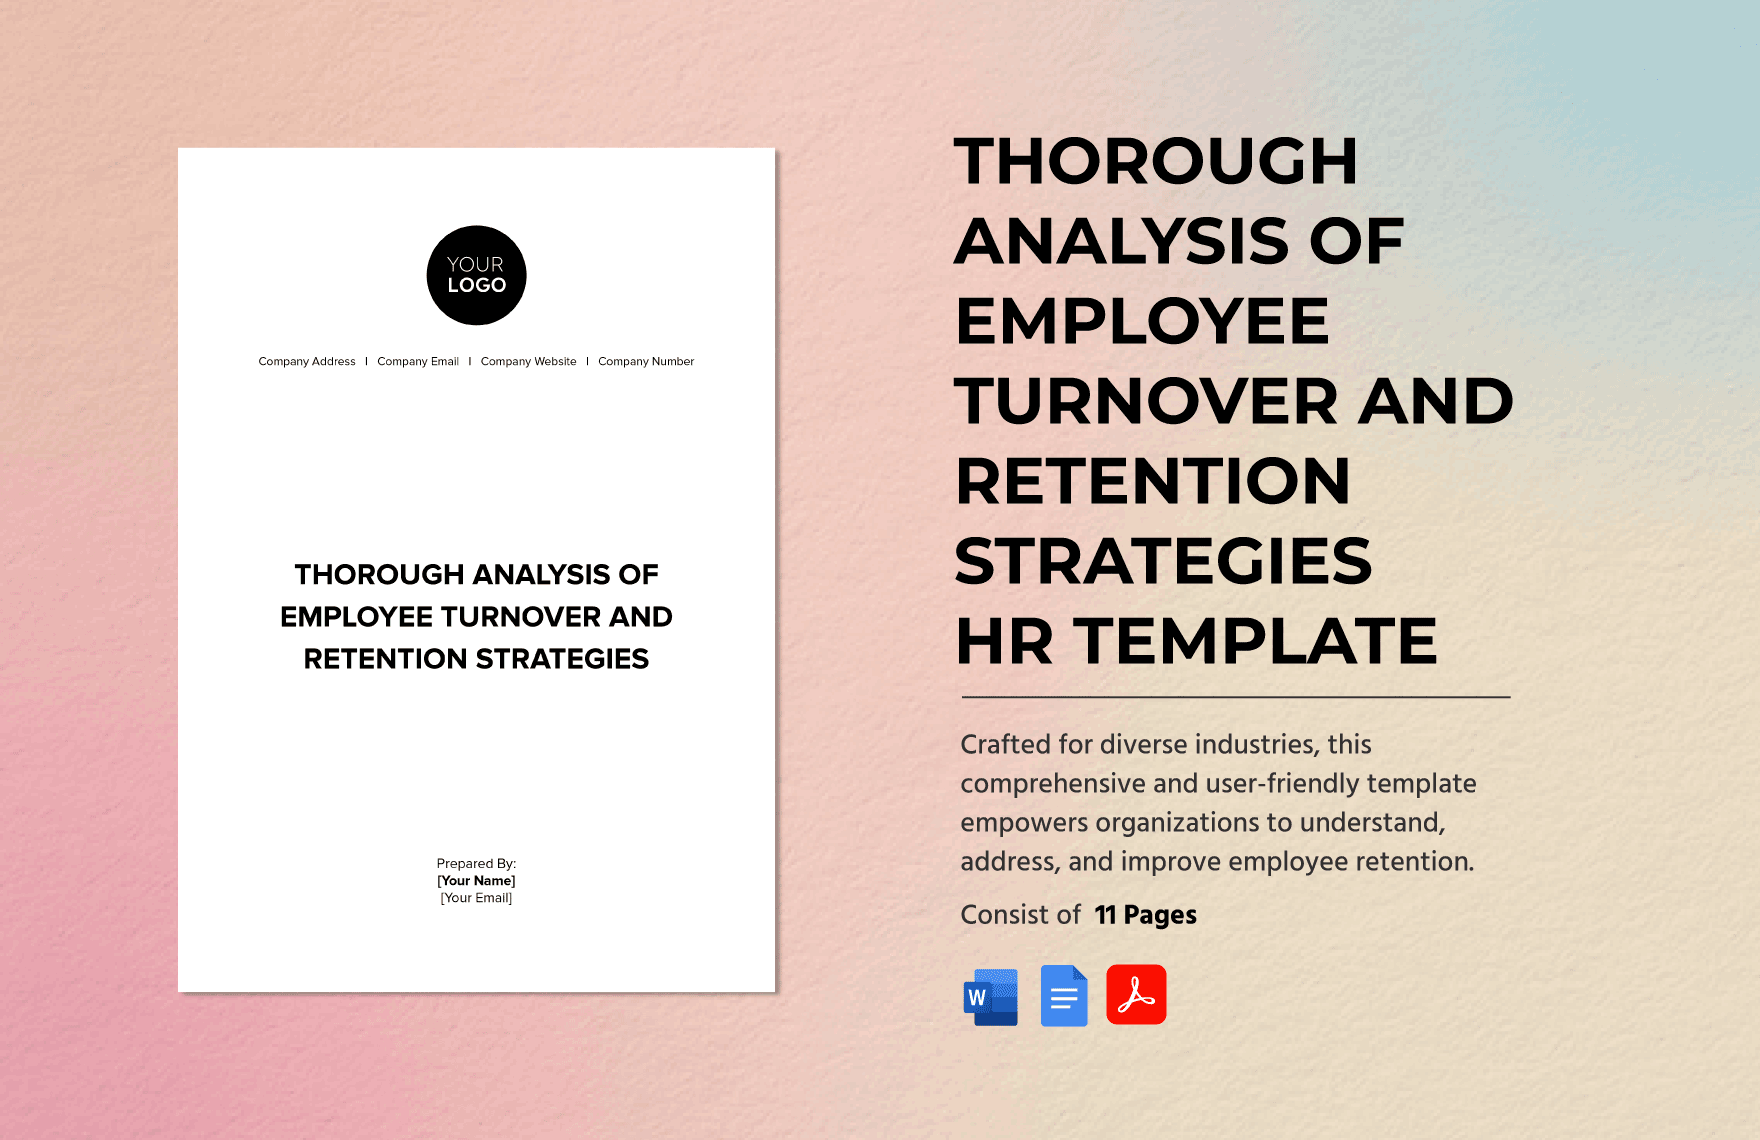 Thorough Analysis of Employee Turnover and Retention Strategies HR Template